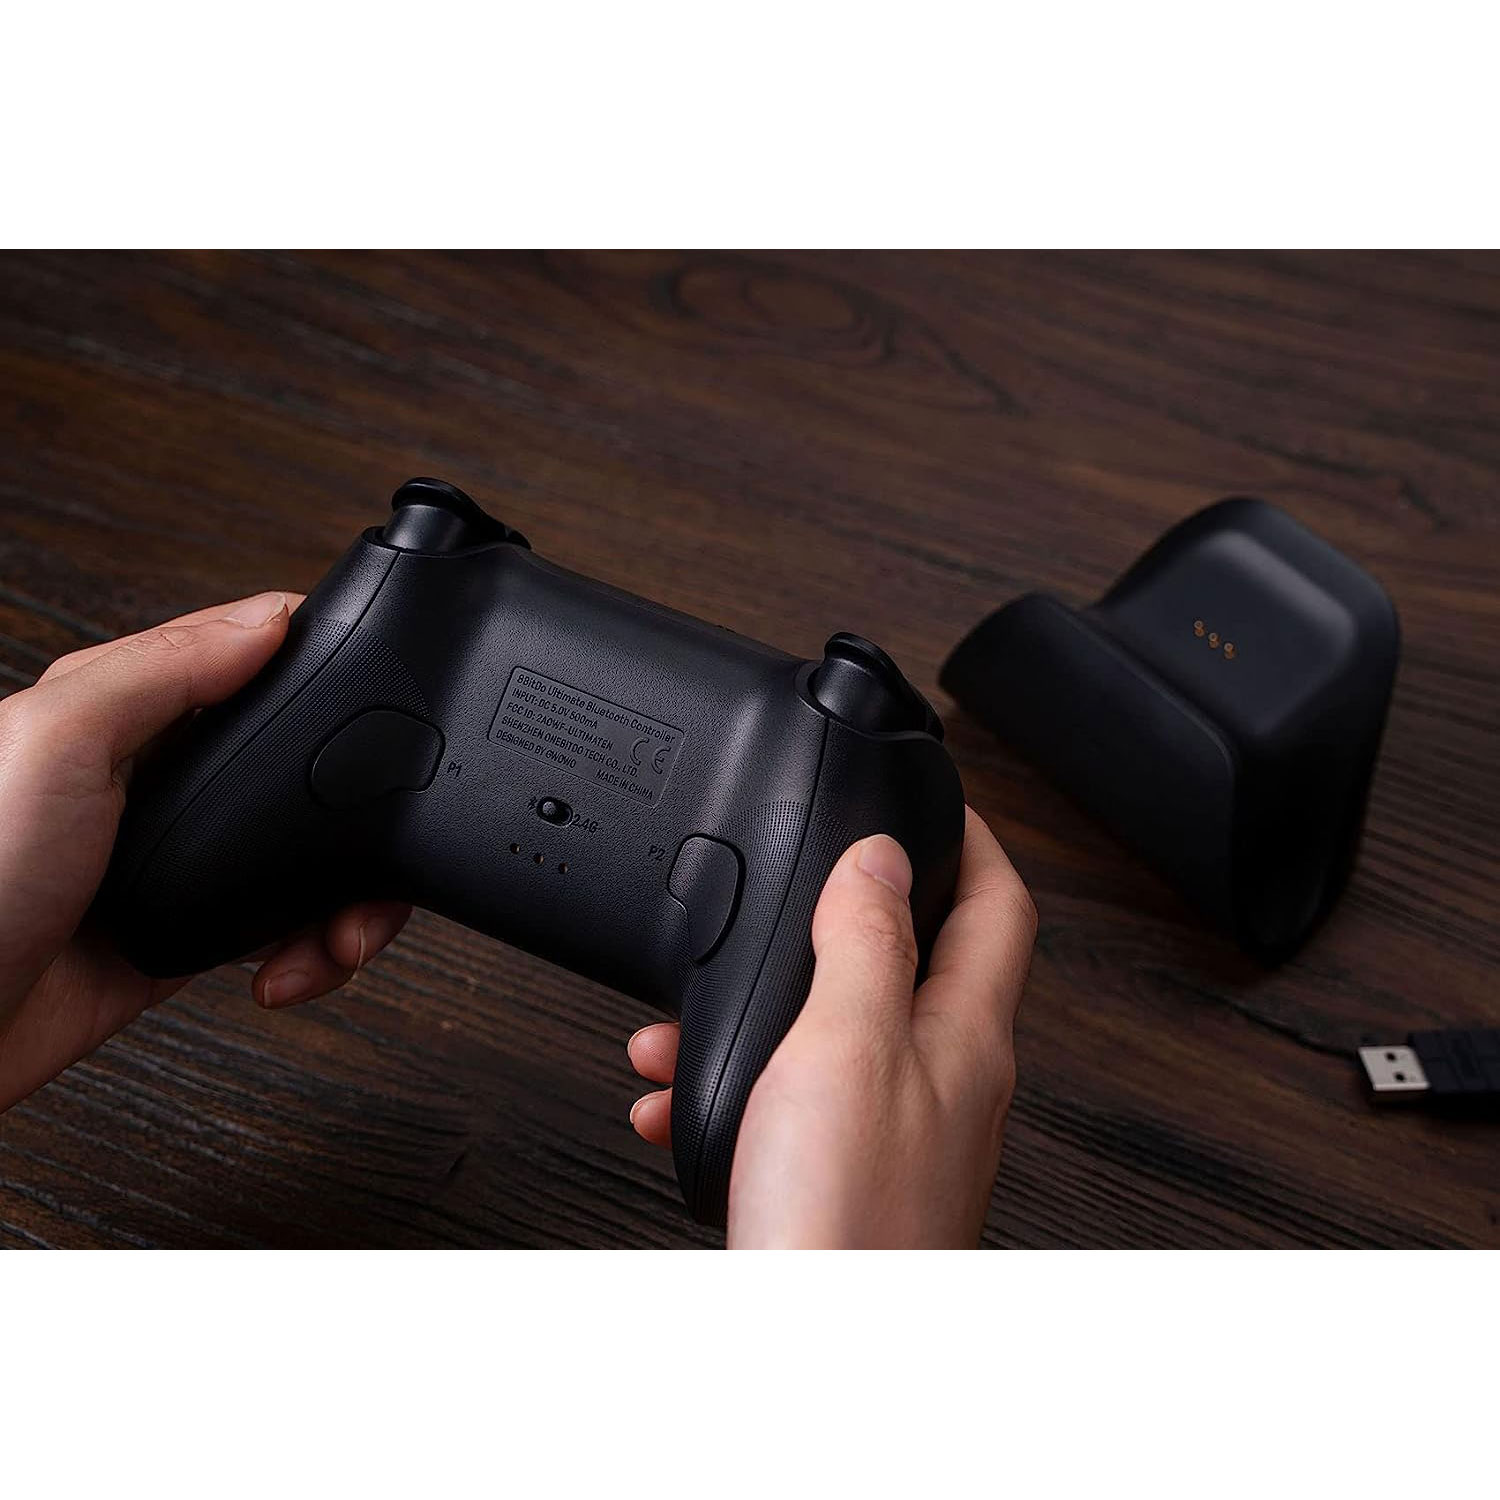 8BitDo Ultimate Controller with Charging Dock for Nintendo Switch / PC /  Steam Deck (Black) for Windows, Nintendo Switch, Steam Deck - Bitcoin &  Lightning accepted